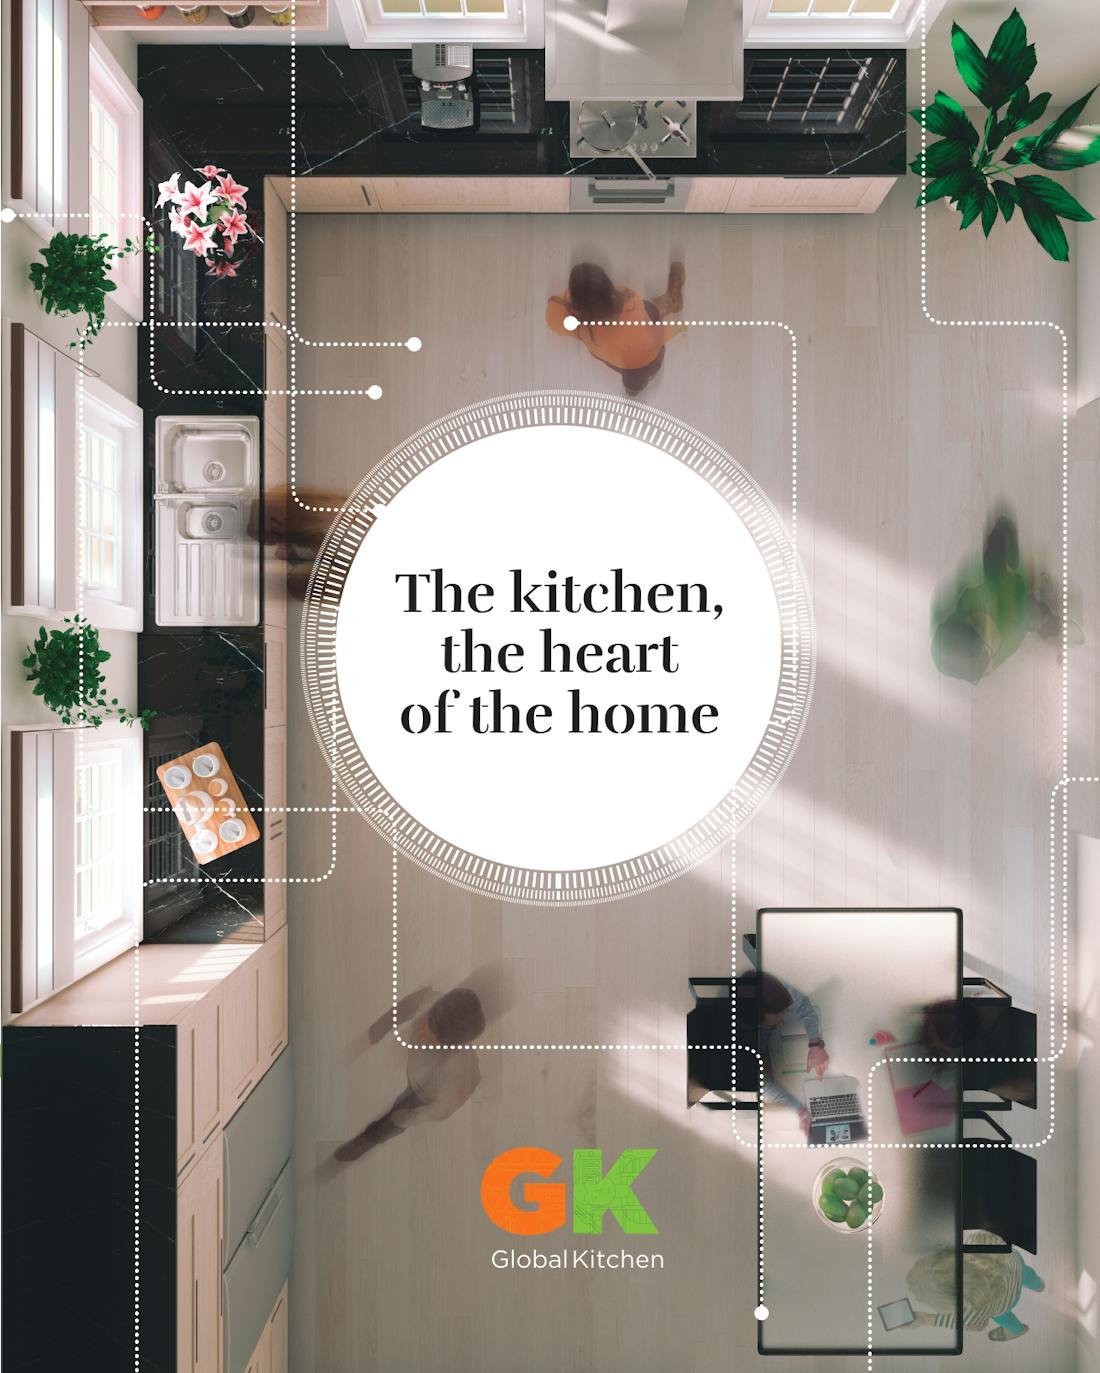 Global Kitchens 2019: The Kitchen is the Heart of the Home